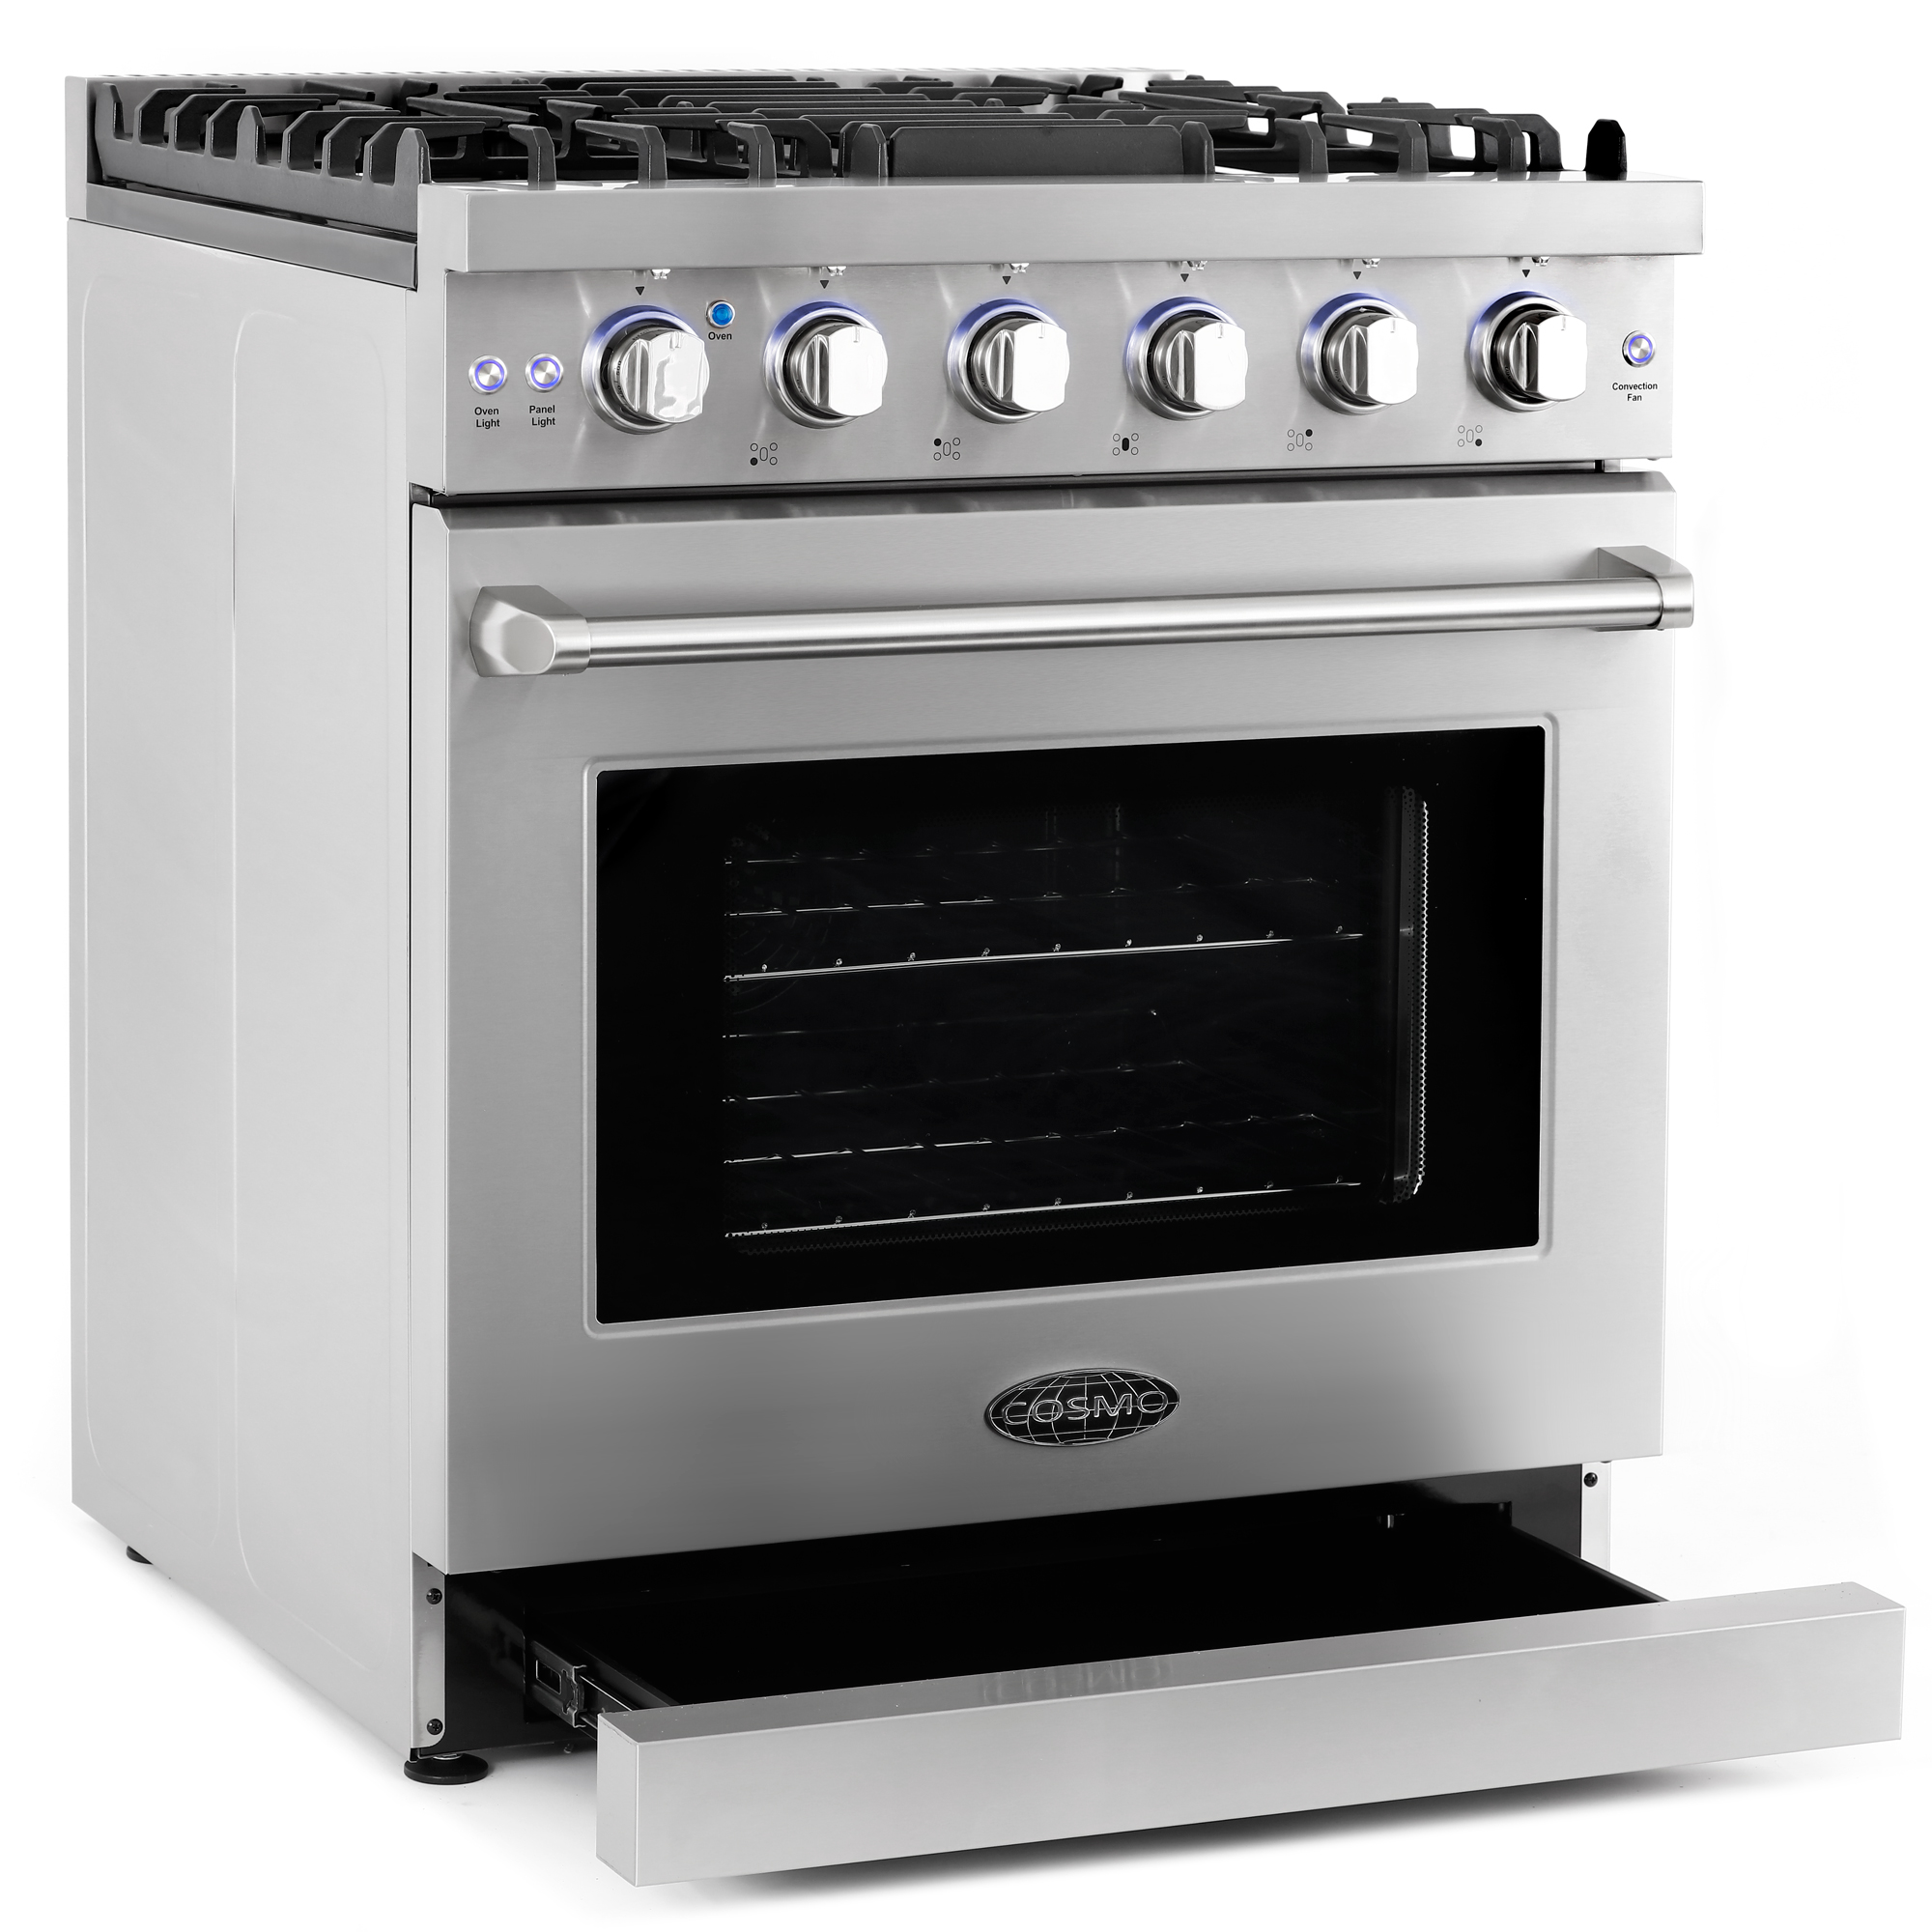 30 in. SlideIn Freestanding Gas Range with 5 Sealed Burner Cooktop, Convection Oven